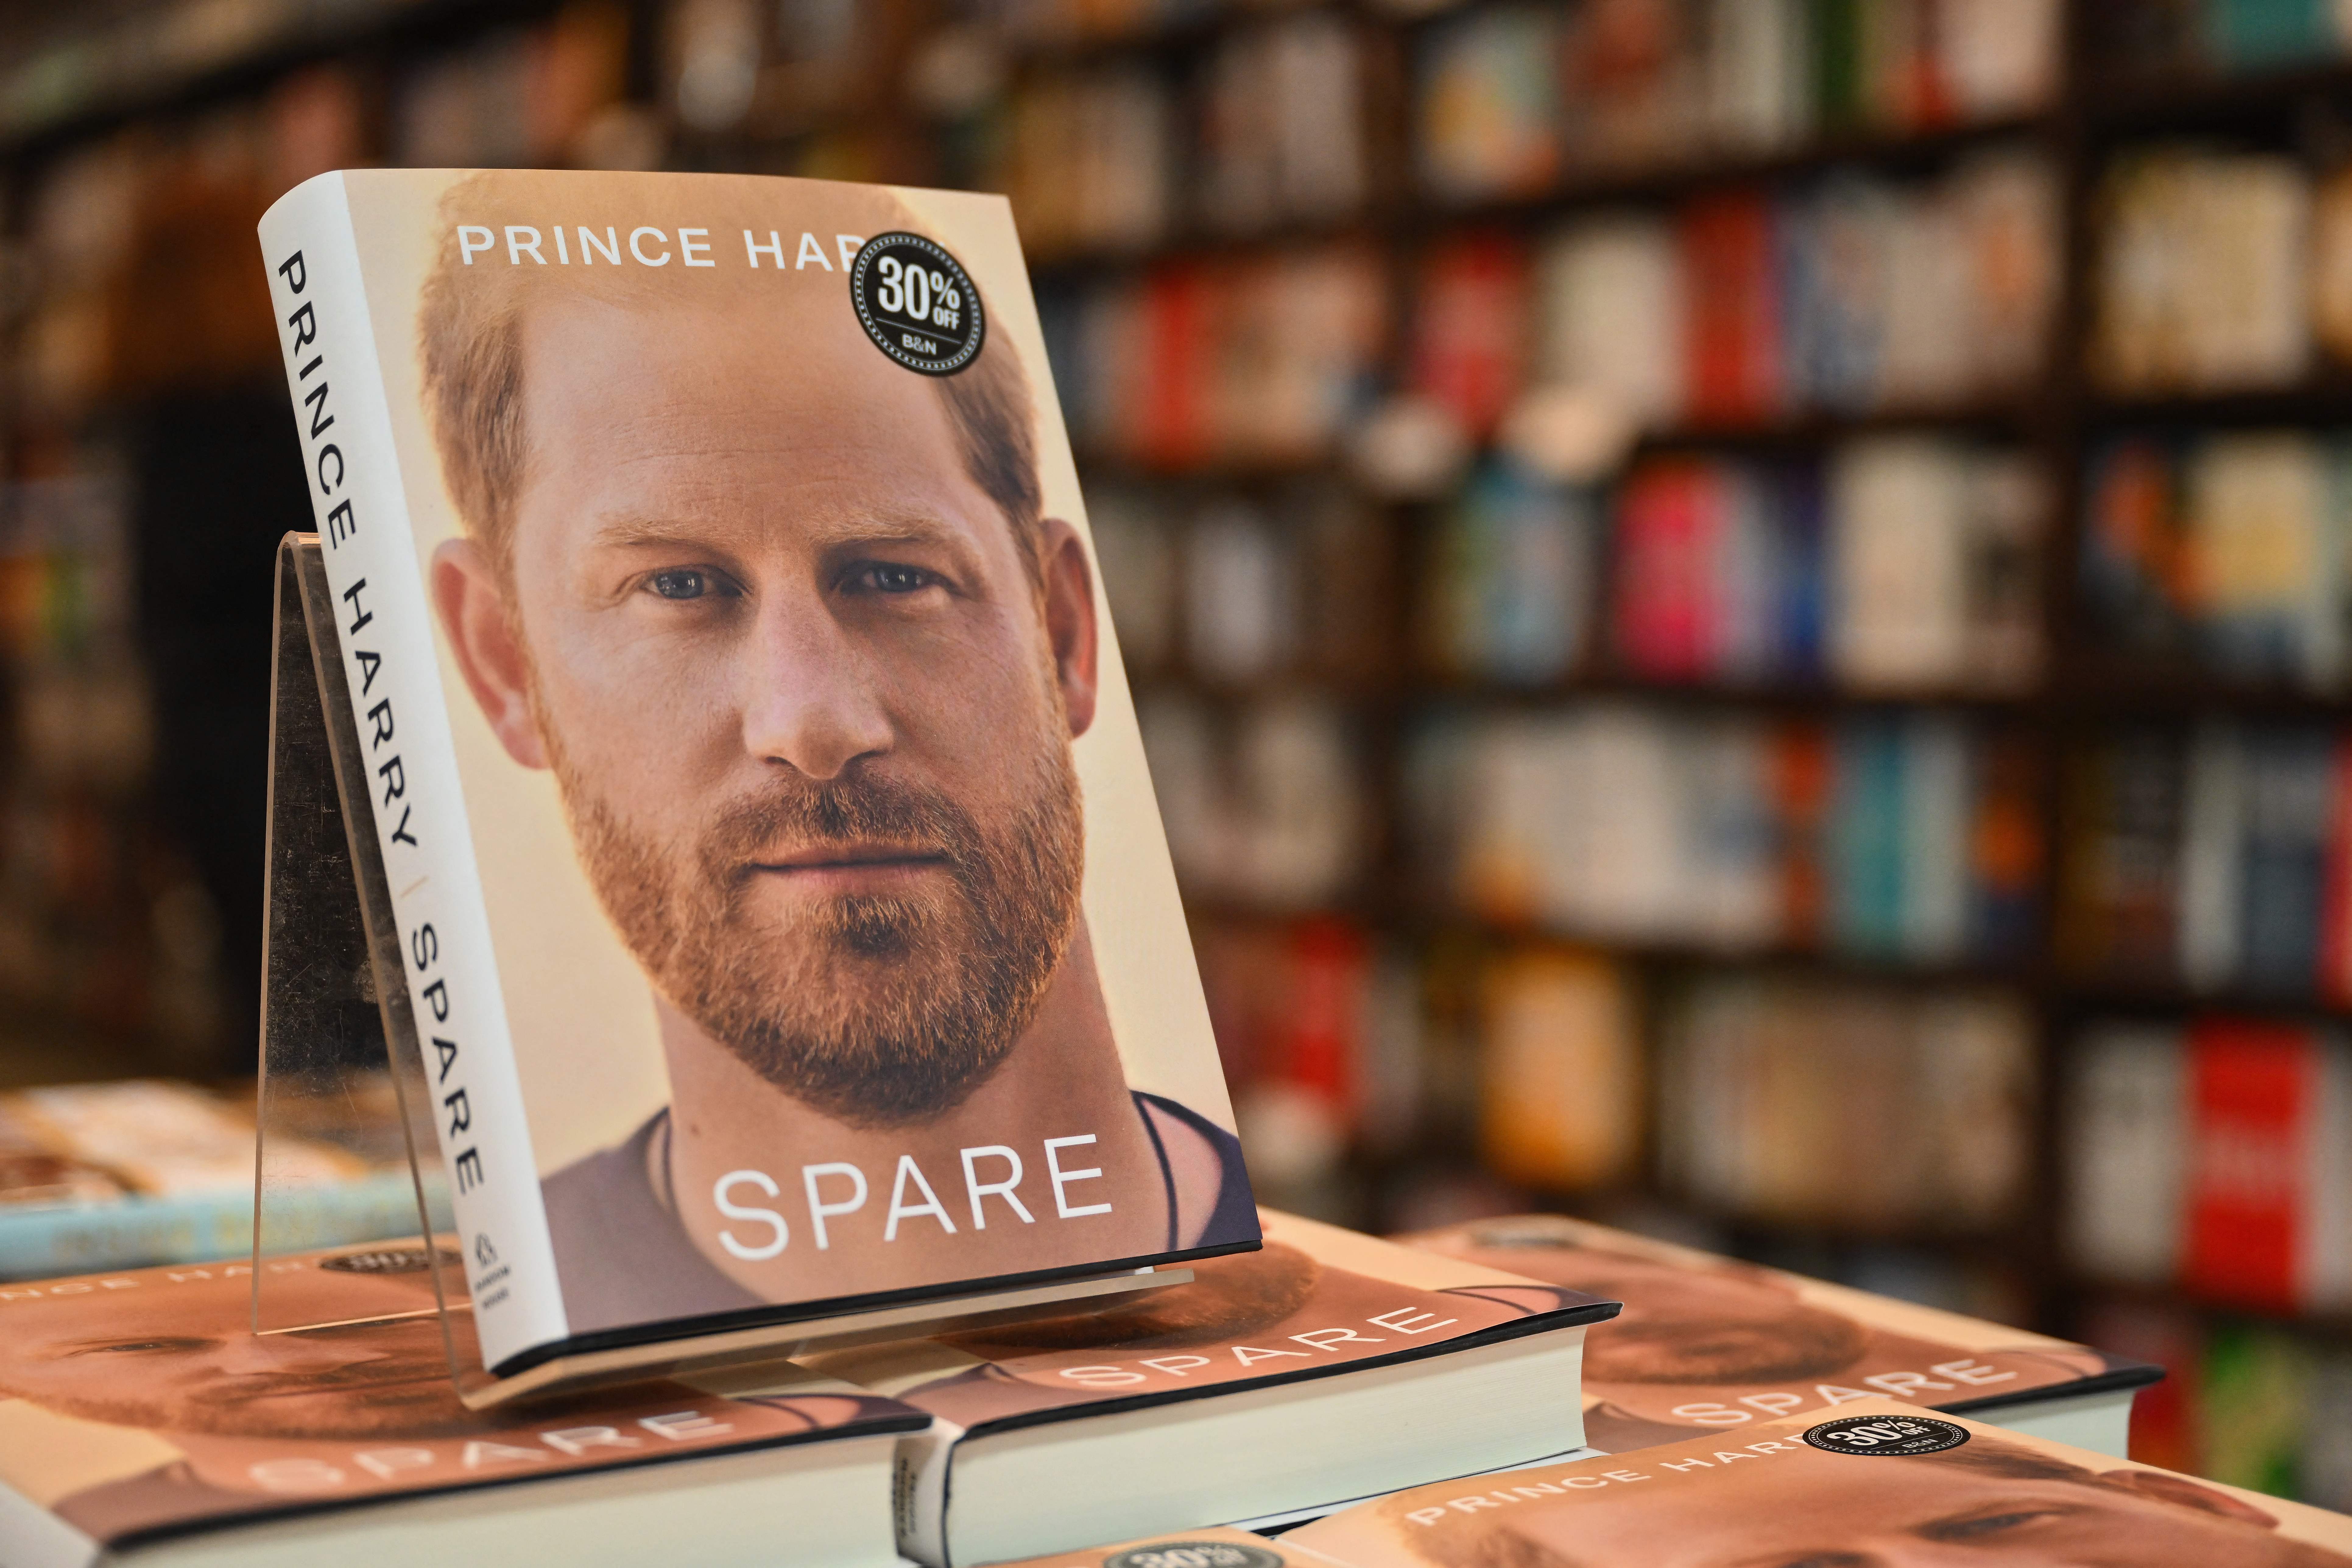 Prince Harry's book "Spare," displayed at a Barnes & Noble bookstore on January 10, 2023 in New York City | Source: Getty Images